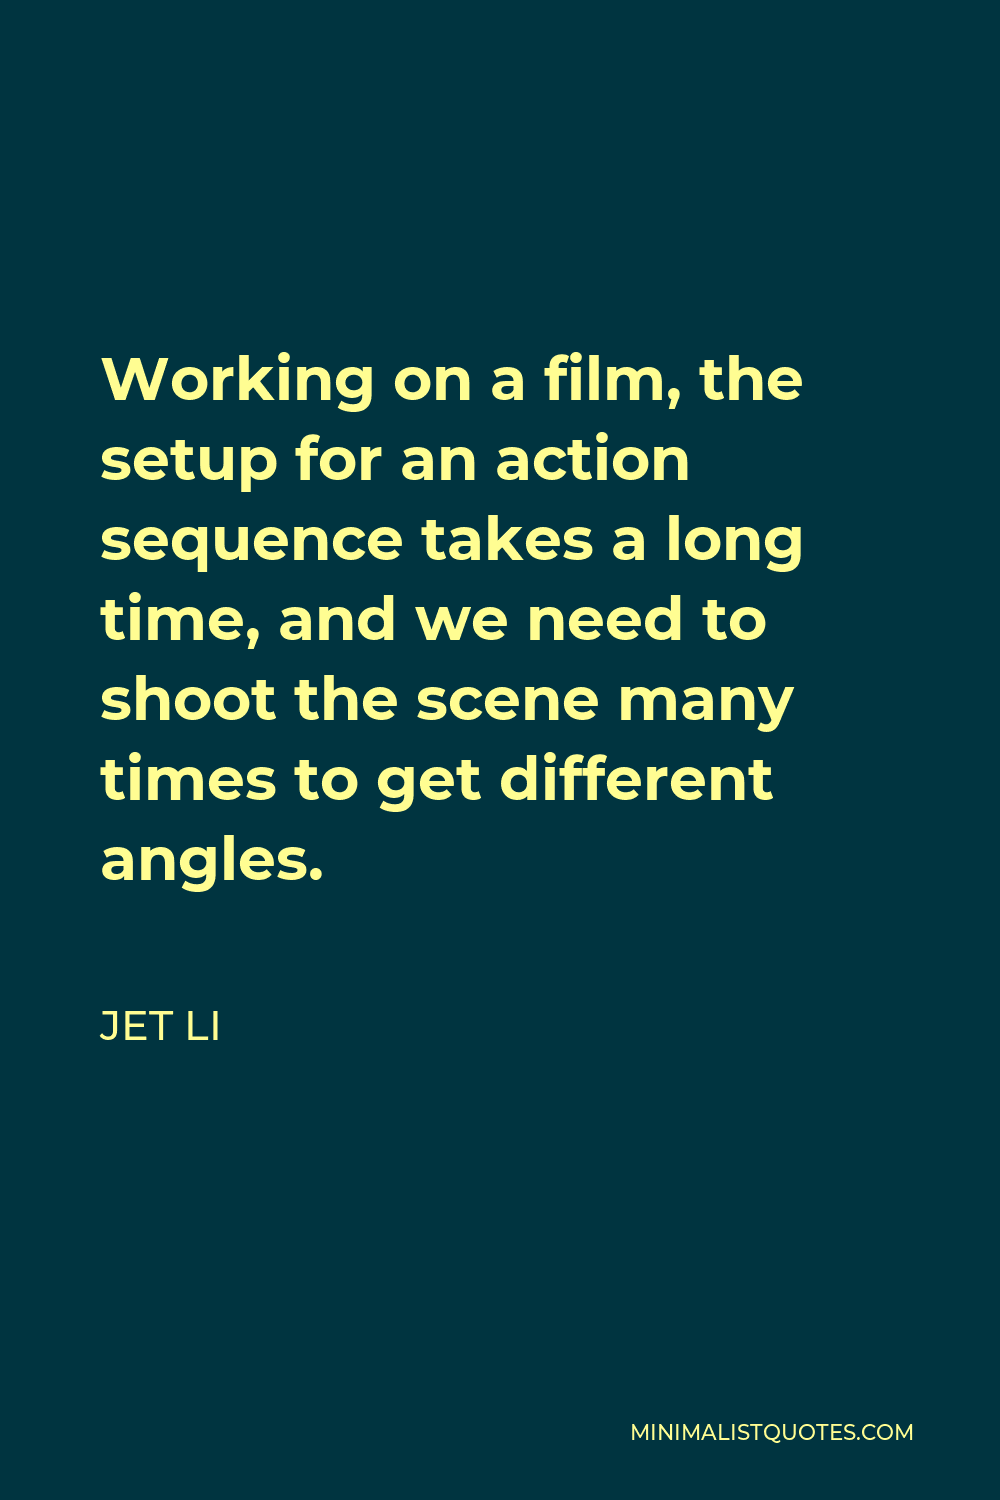 Jet Li Quote - Working on a film, the setup for an action sequence takes a long time, and we need to shoot the scene many times to get different angles.